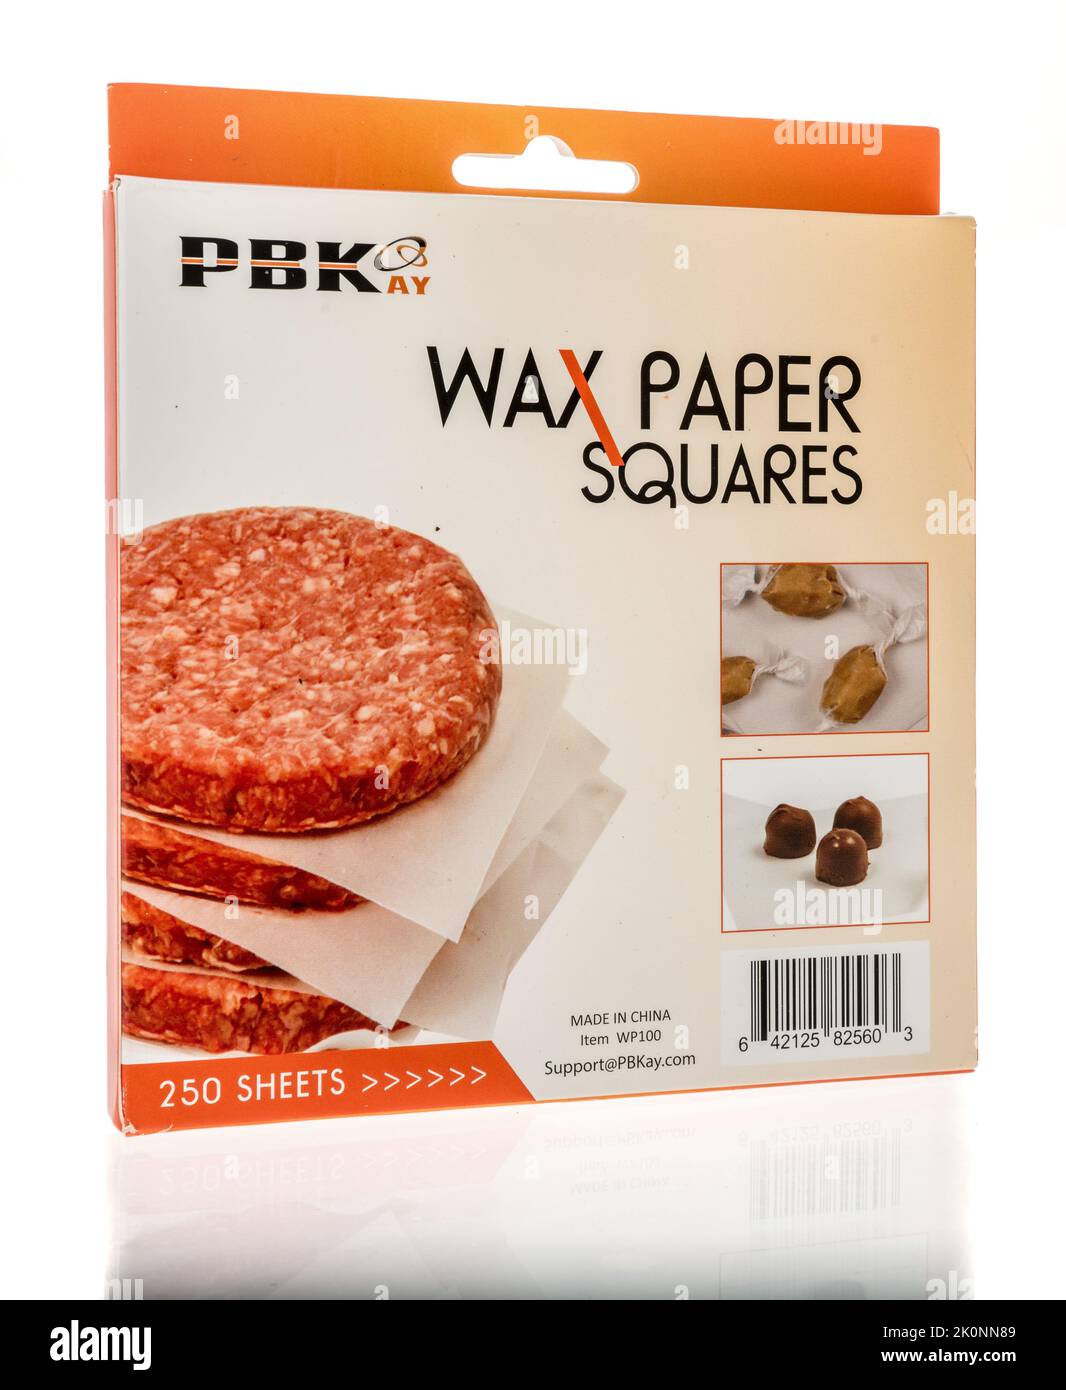 Winneconne, WI - 5 July 2022: A package of nPBKay wax paper squares on an isolated background. Stock Photo